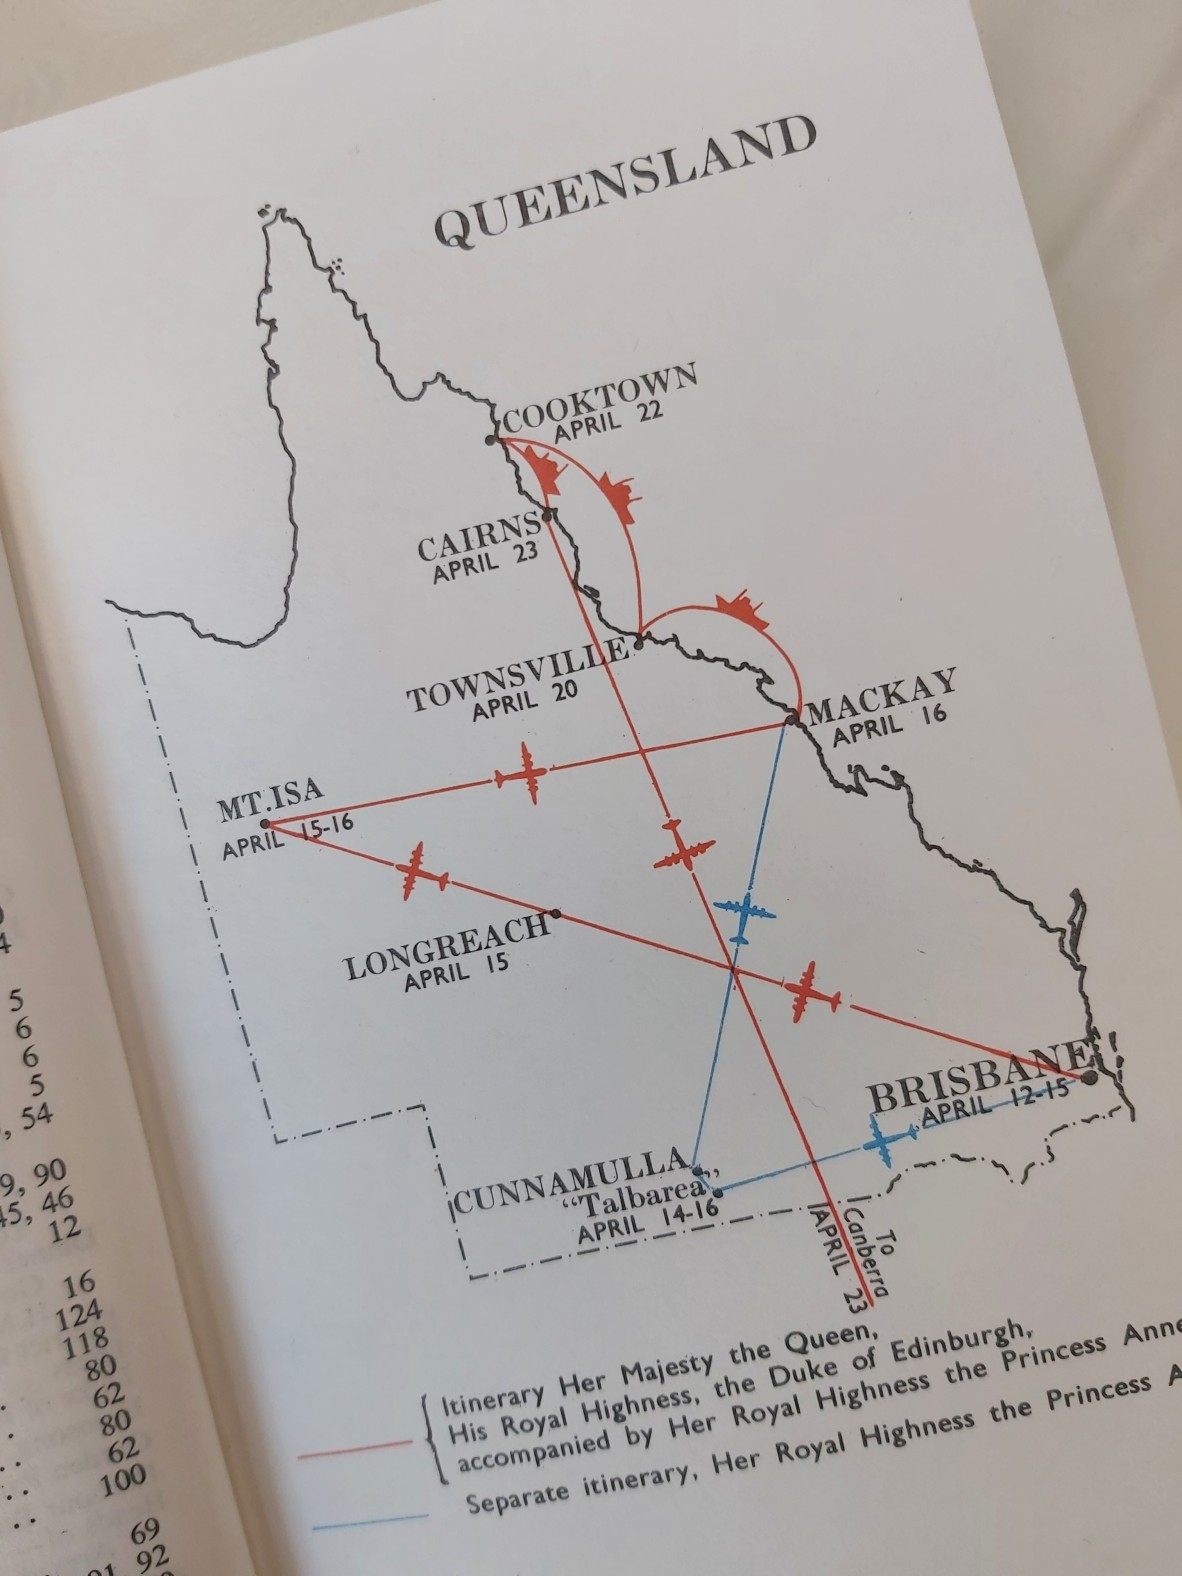 Map of Queensland showing flight paths and destinations across Queensland of the 1970 royal visit including Princess Annes detour to Cunnamulla 